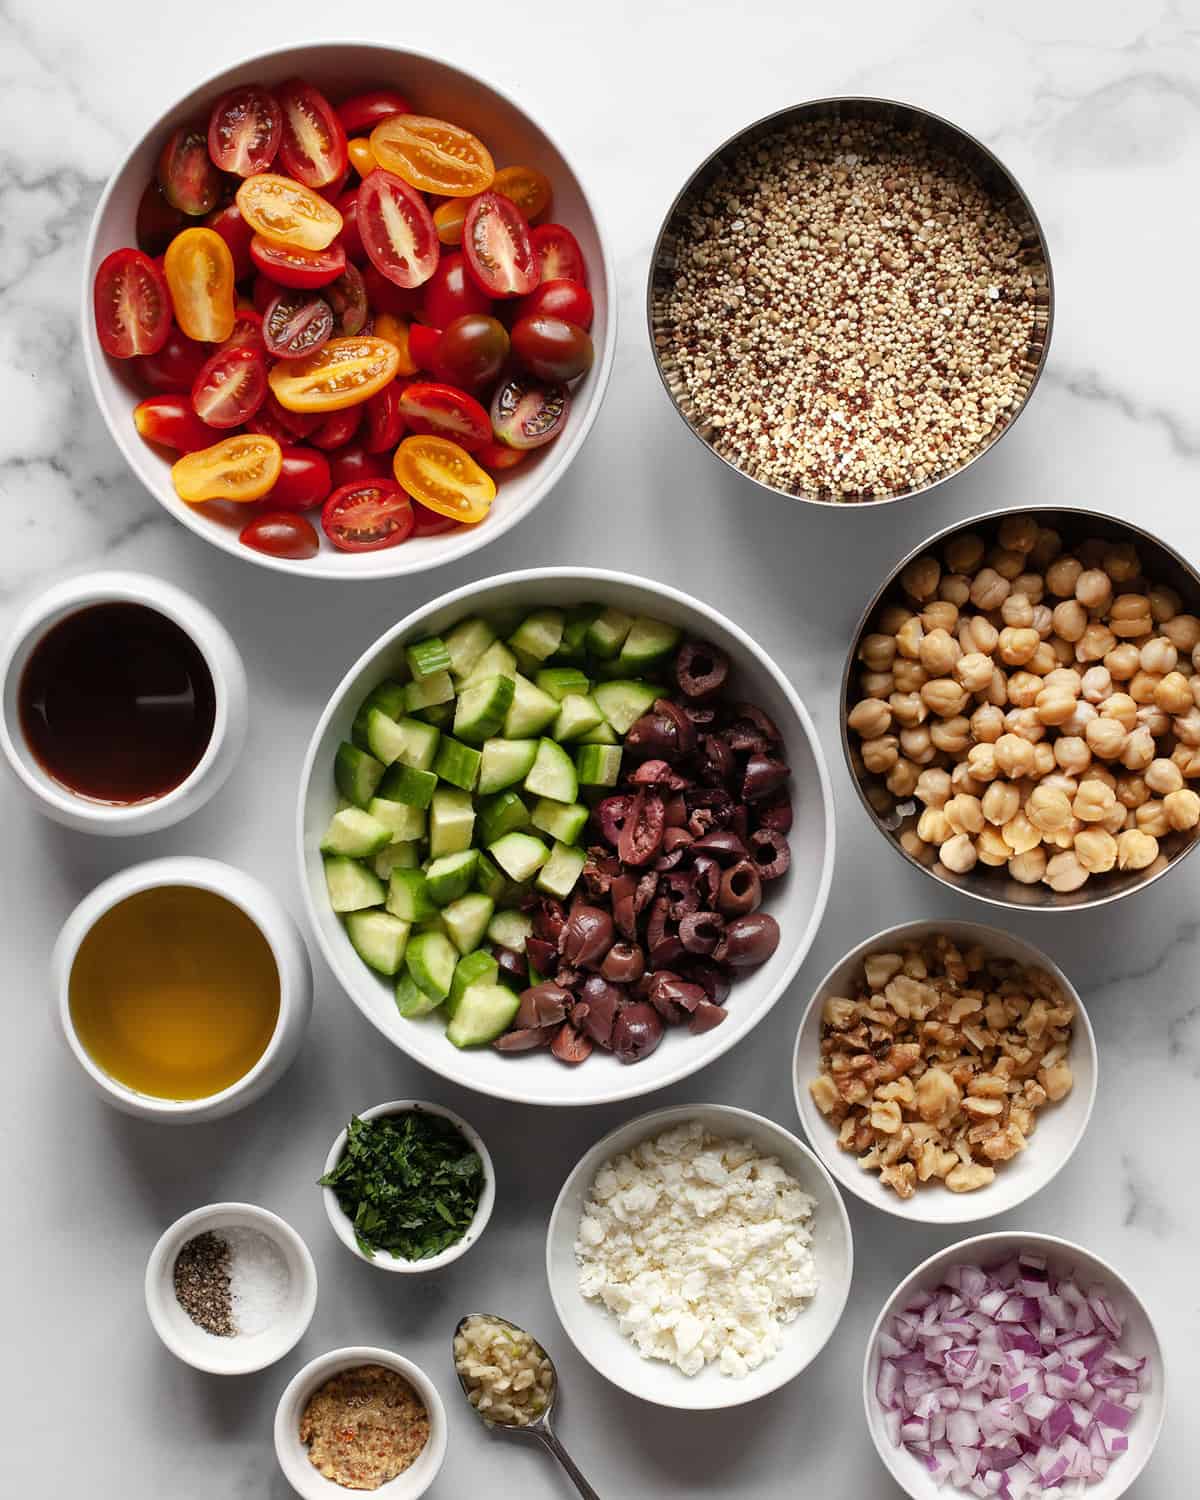 Ingredients including quinoa, chickpeas, tomatoes, cucumbers, olives, red onions, olive oil and red wine vinegar.